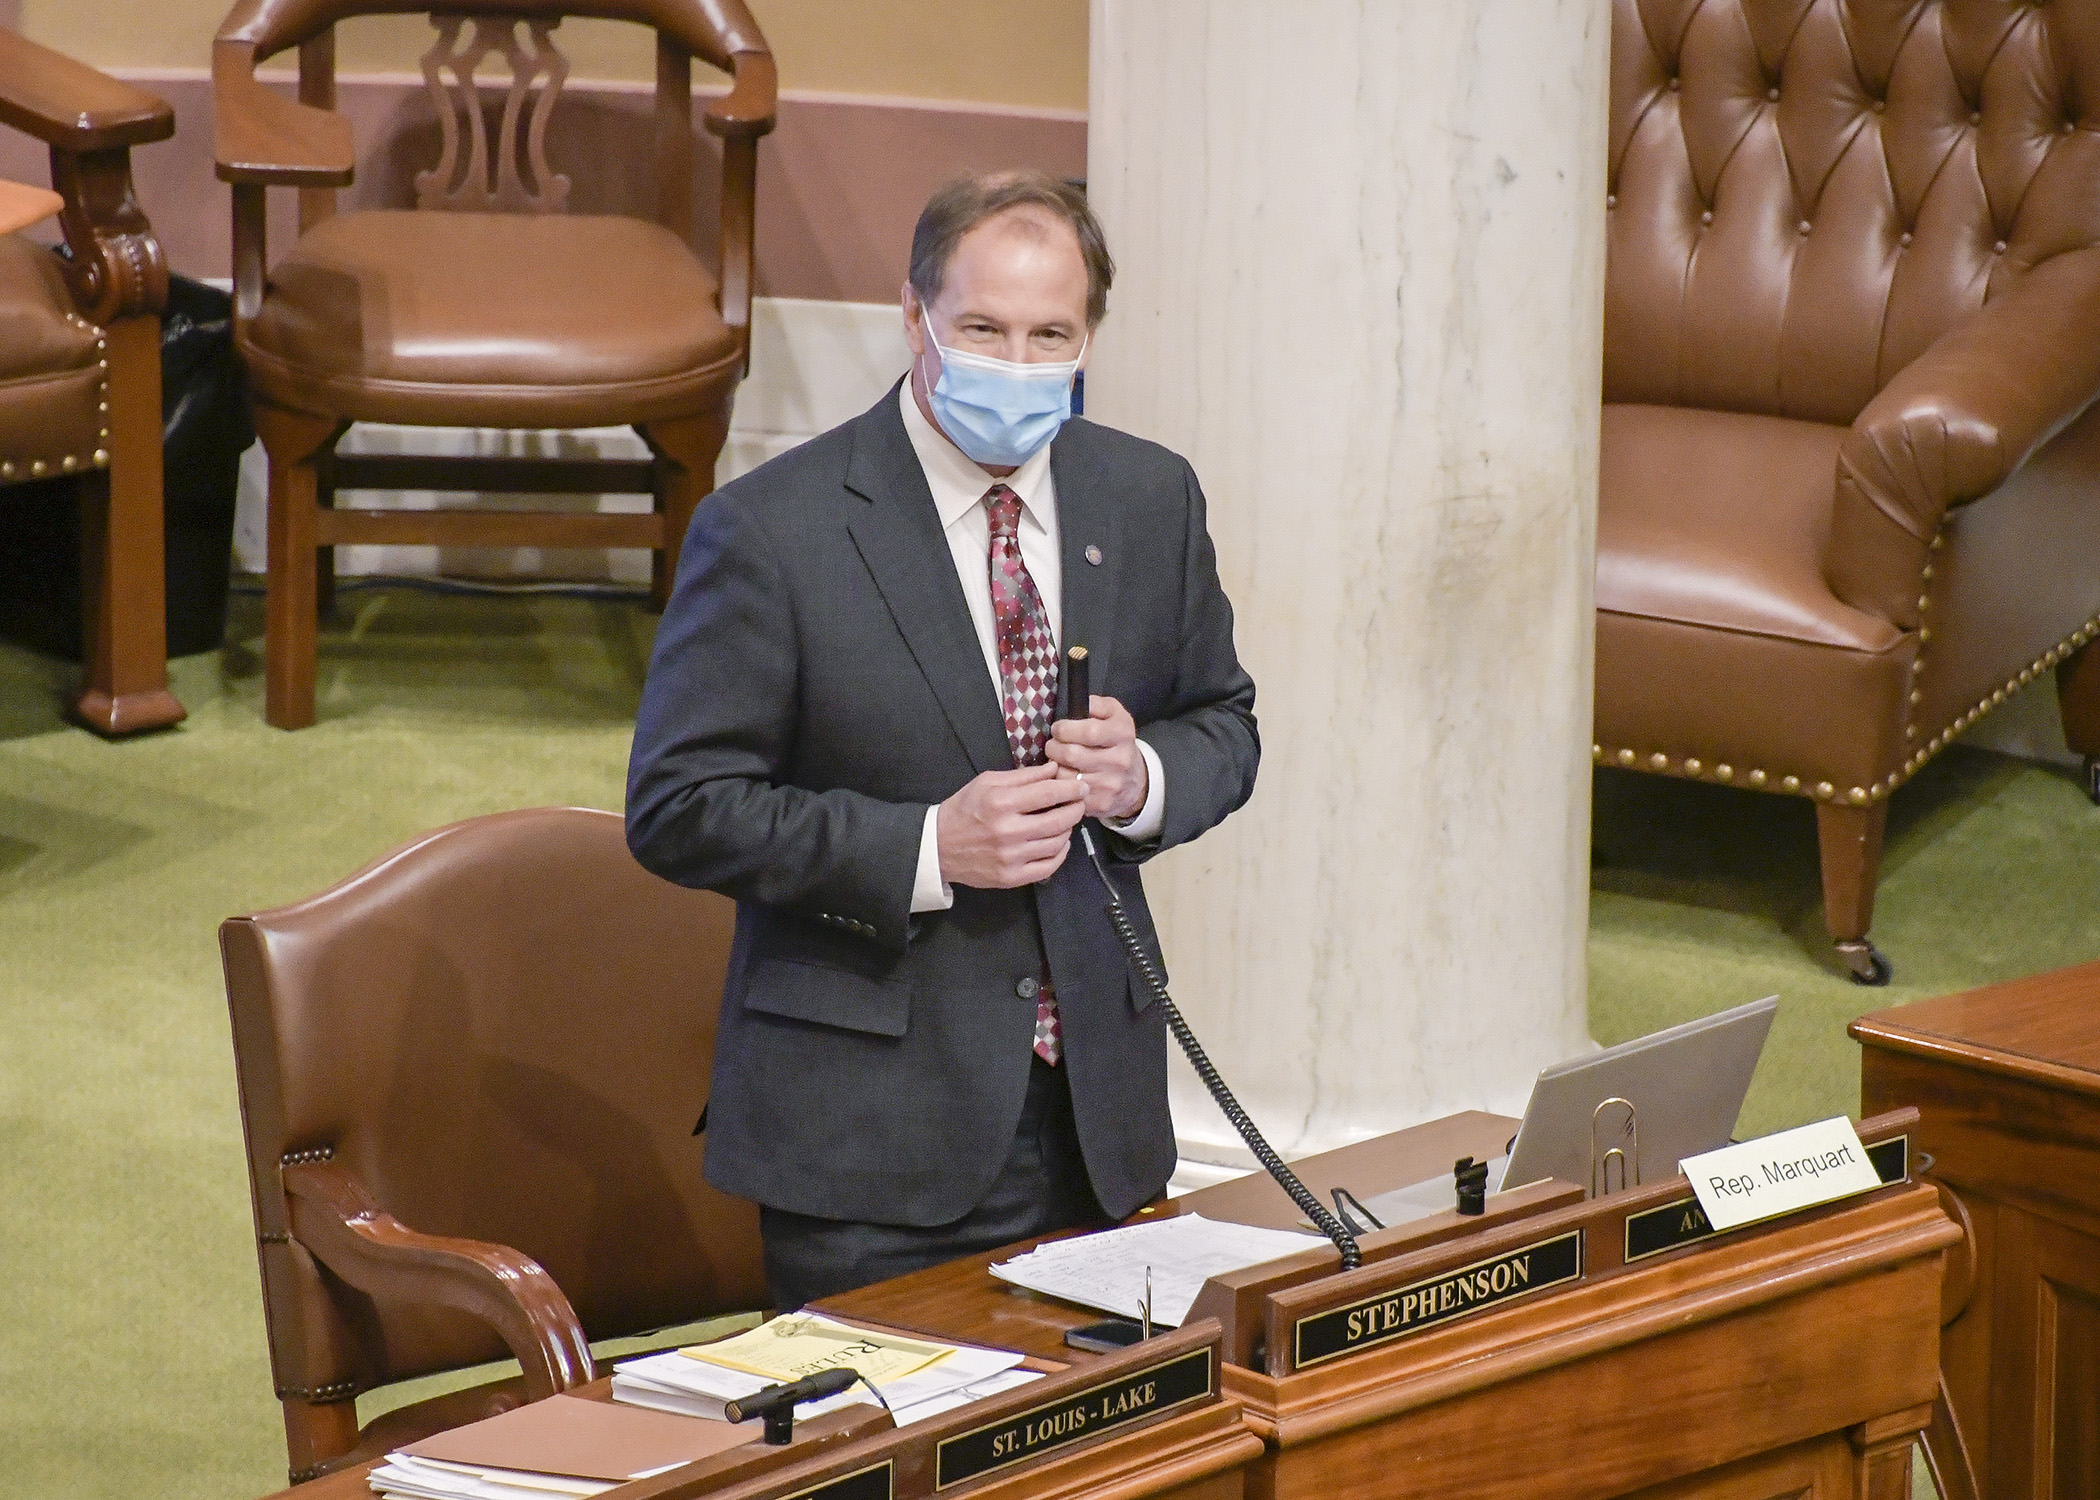 Rep. Paul Marquart, chair of the House Taxes Committee, makes opening comments during floor debate on the omnibus tax bill April 22. Photo by Andrew VonBank